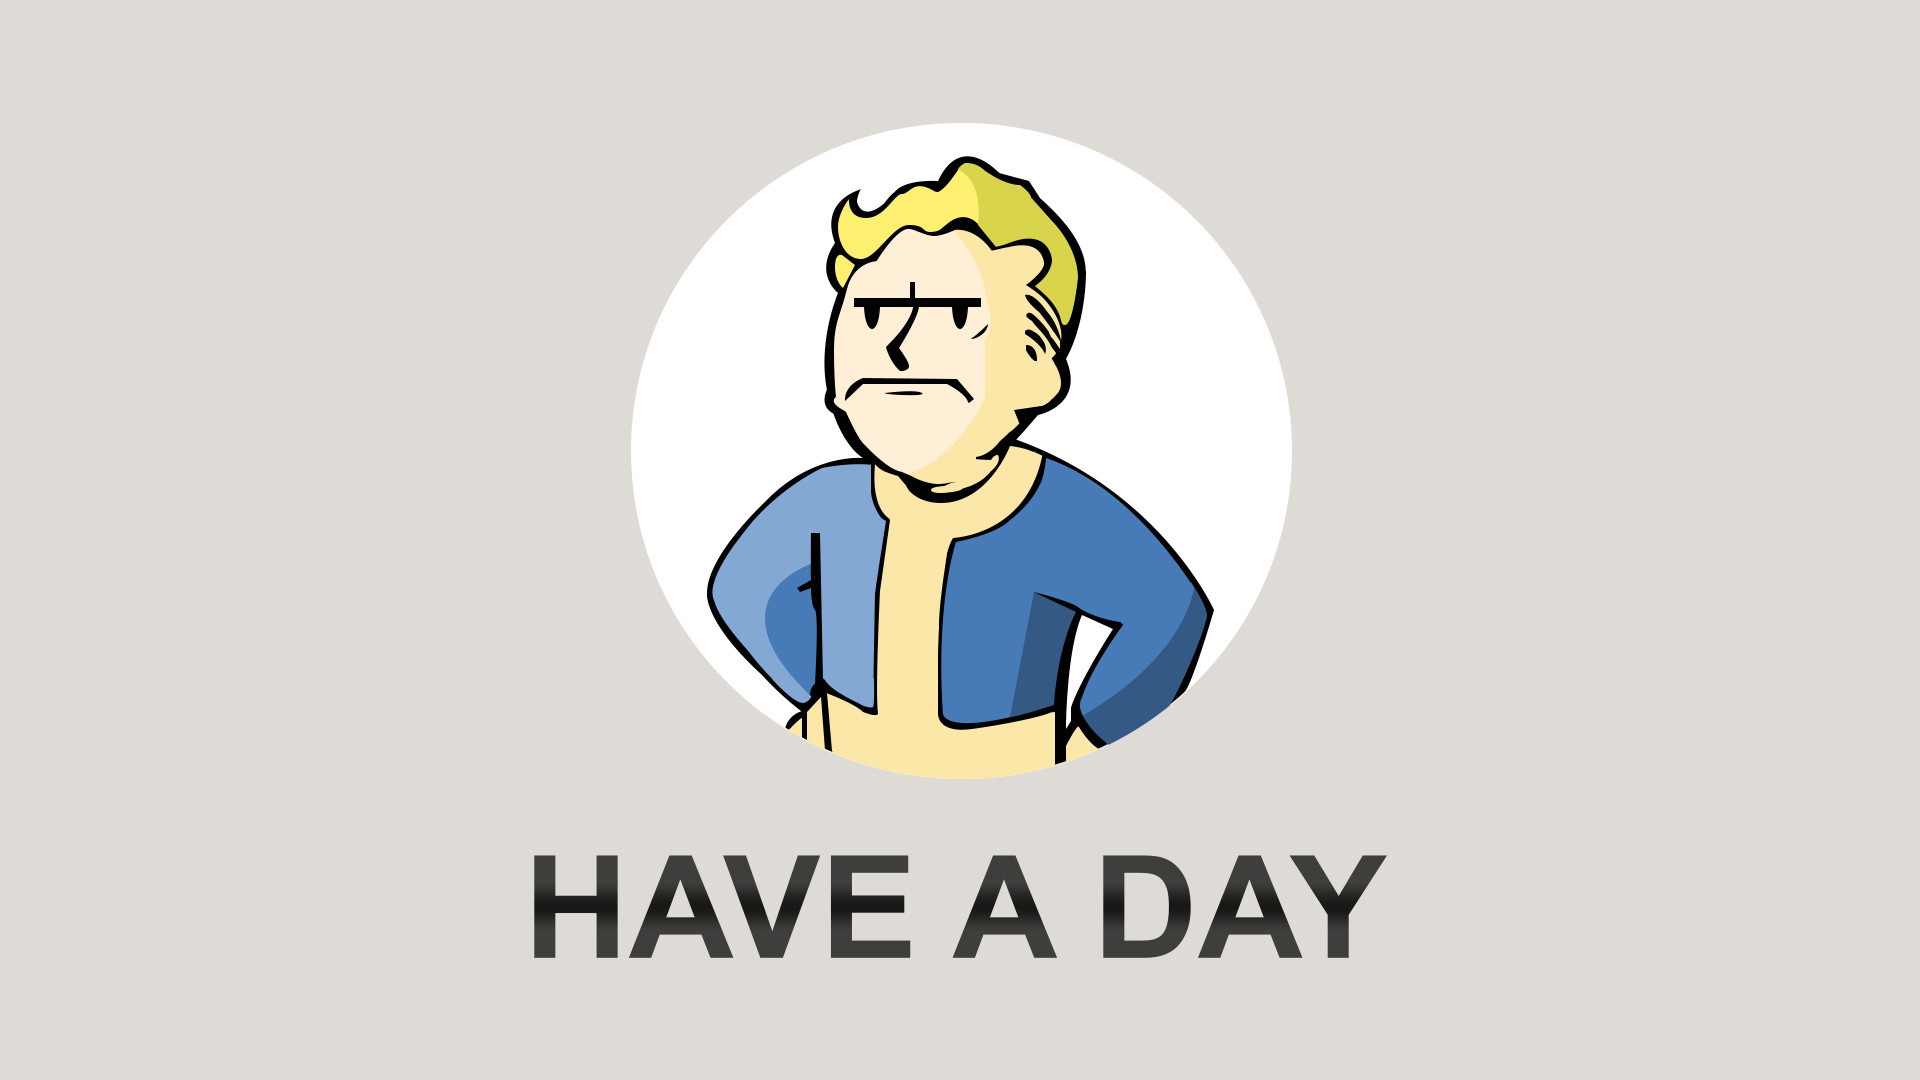 Inspired by my previous wallpaper, the Vault Boy 1920 x 1080 x post / r / gaming